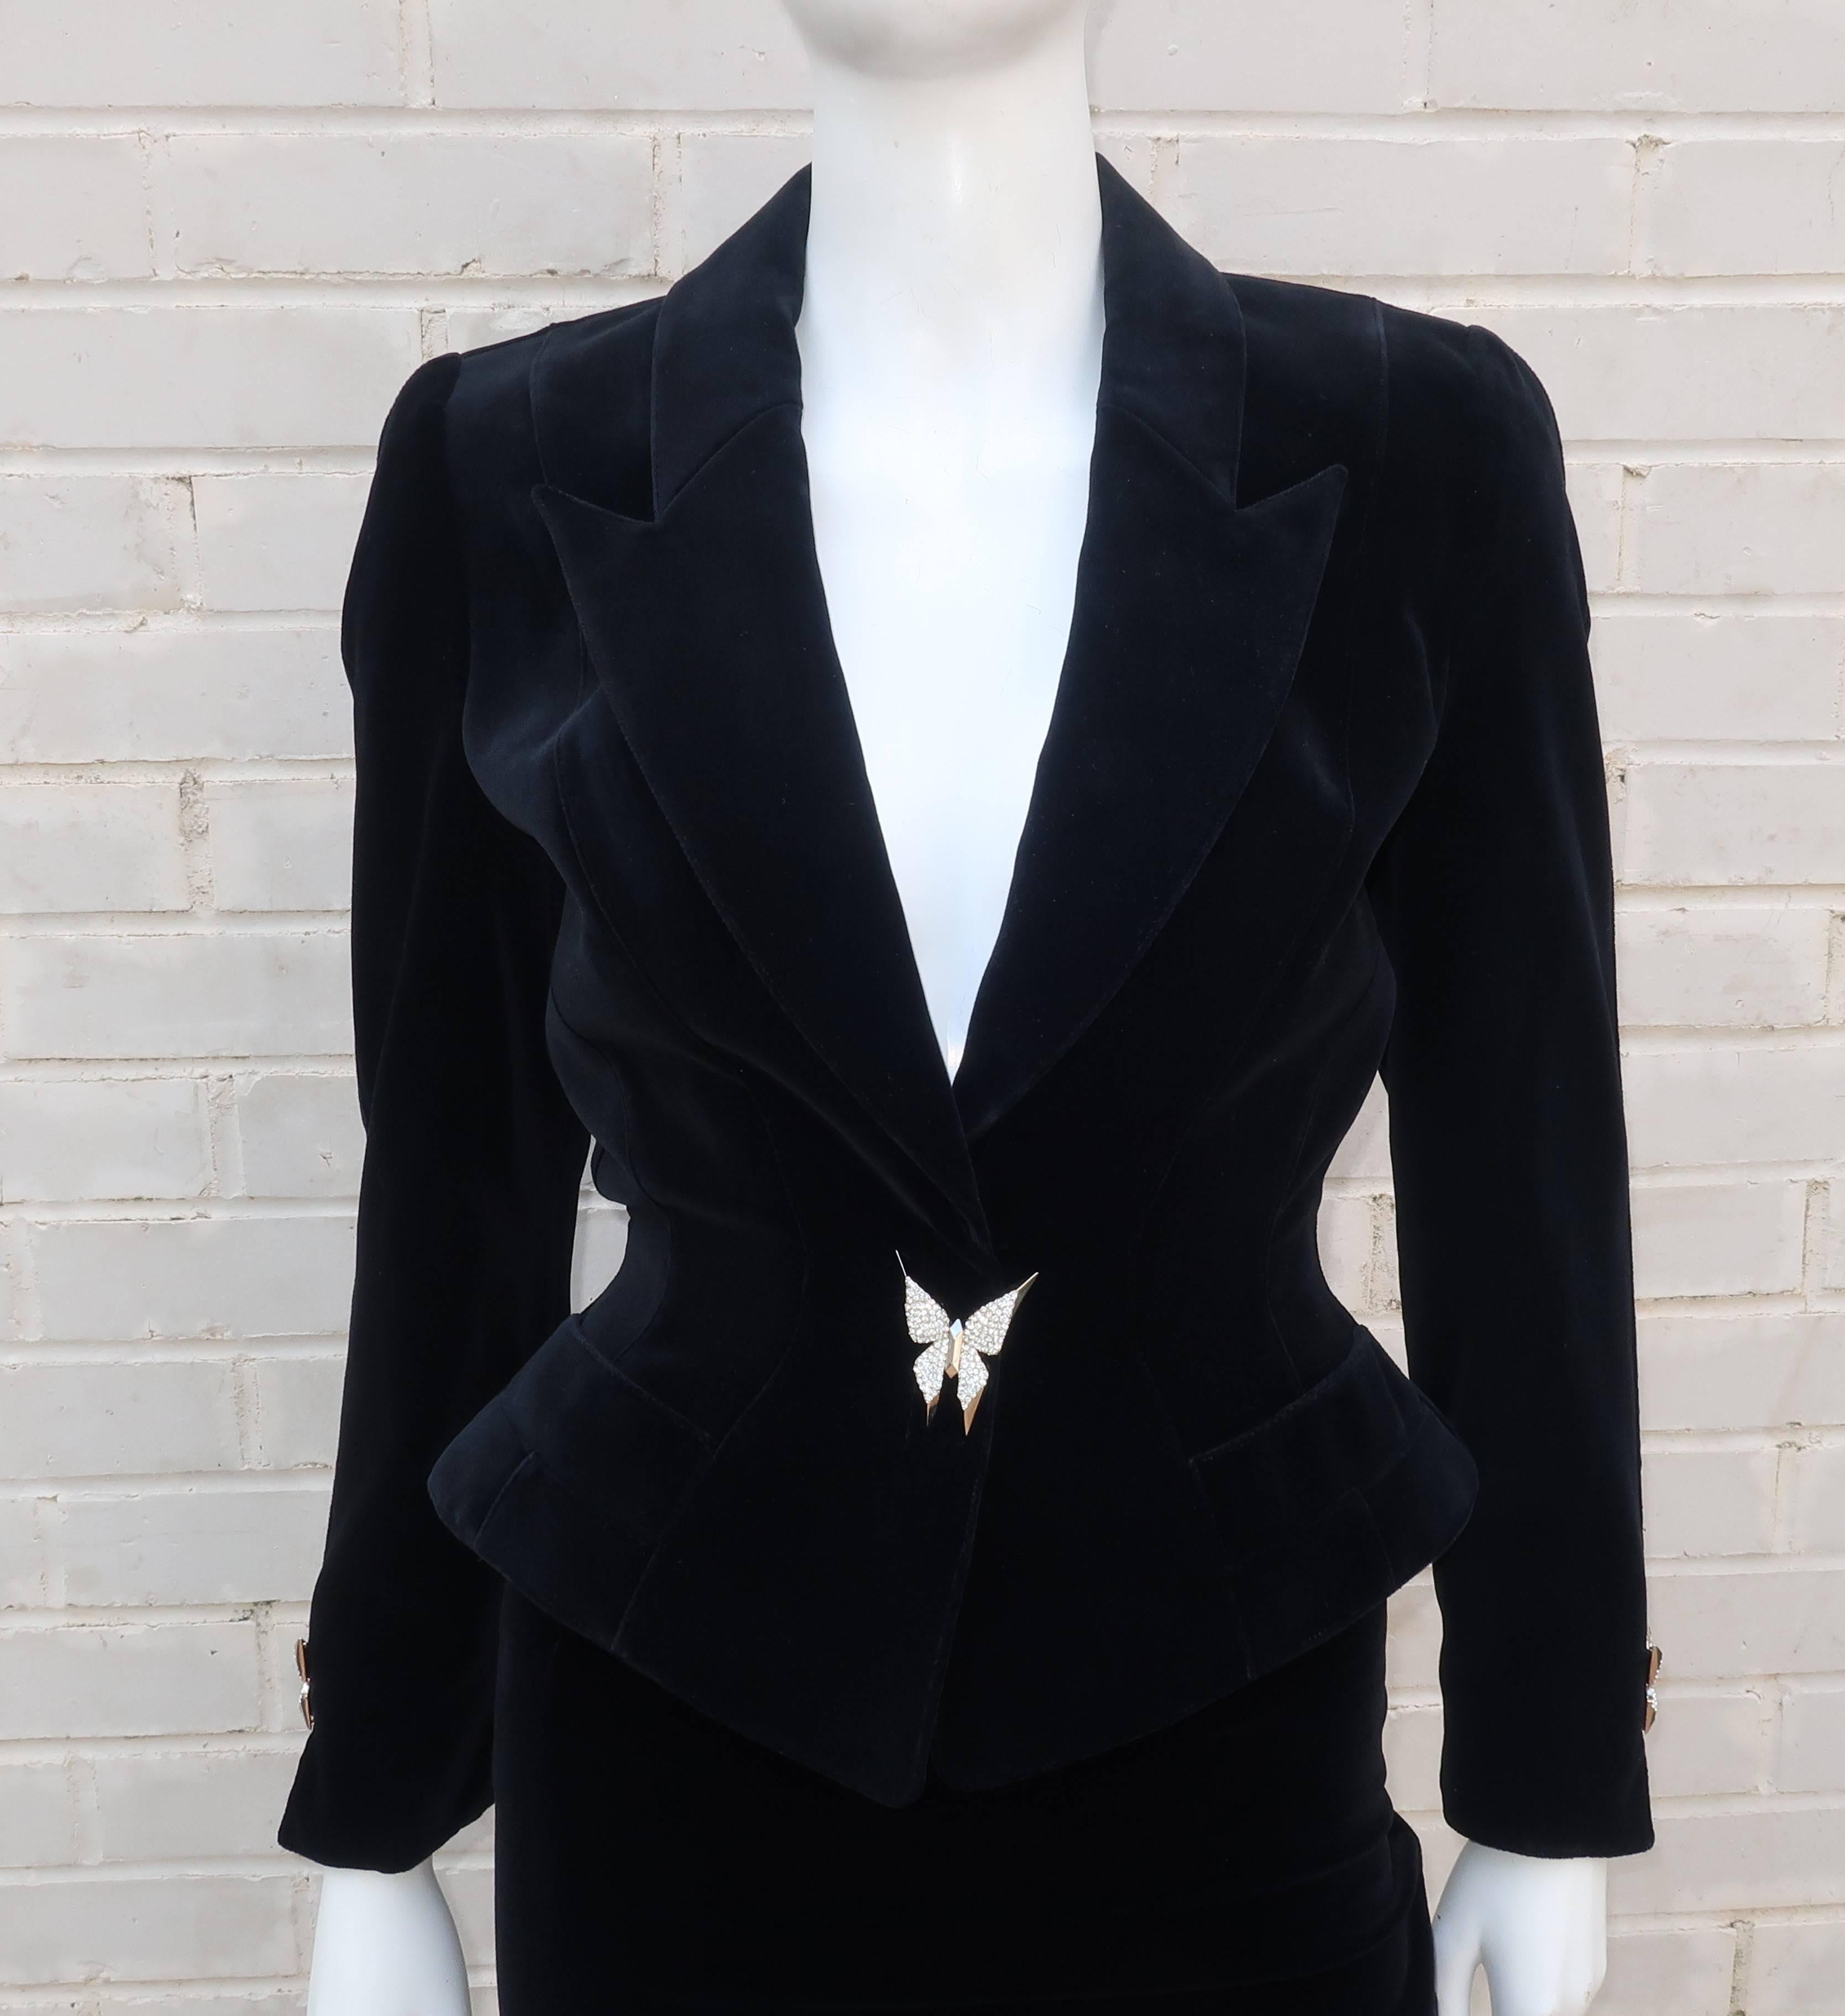 Women's Vintage Thierry Mugler Black Velvet Wasp Waist Suit With Butterfly Buttons